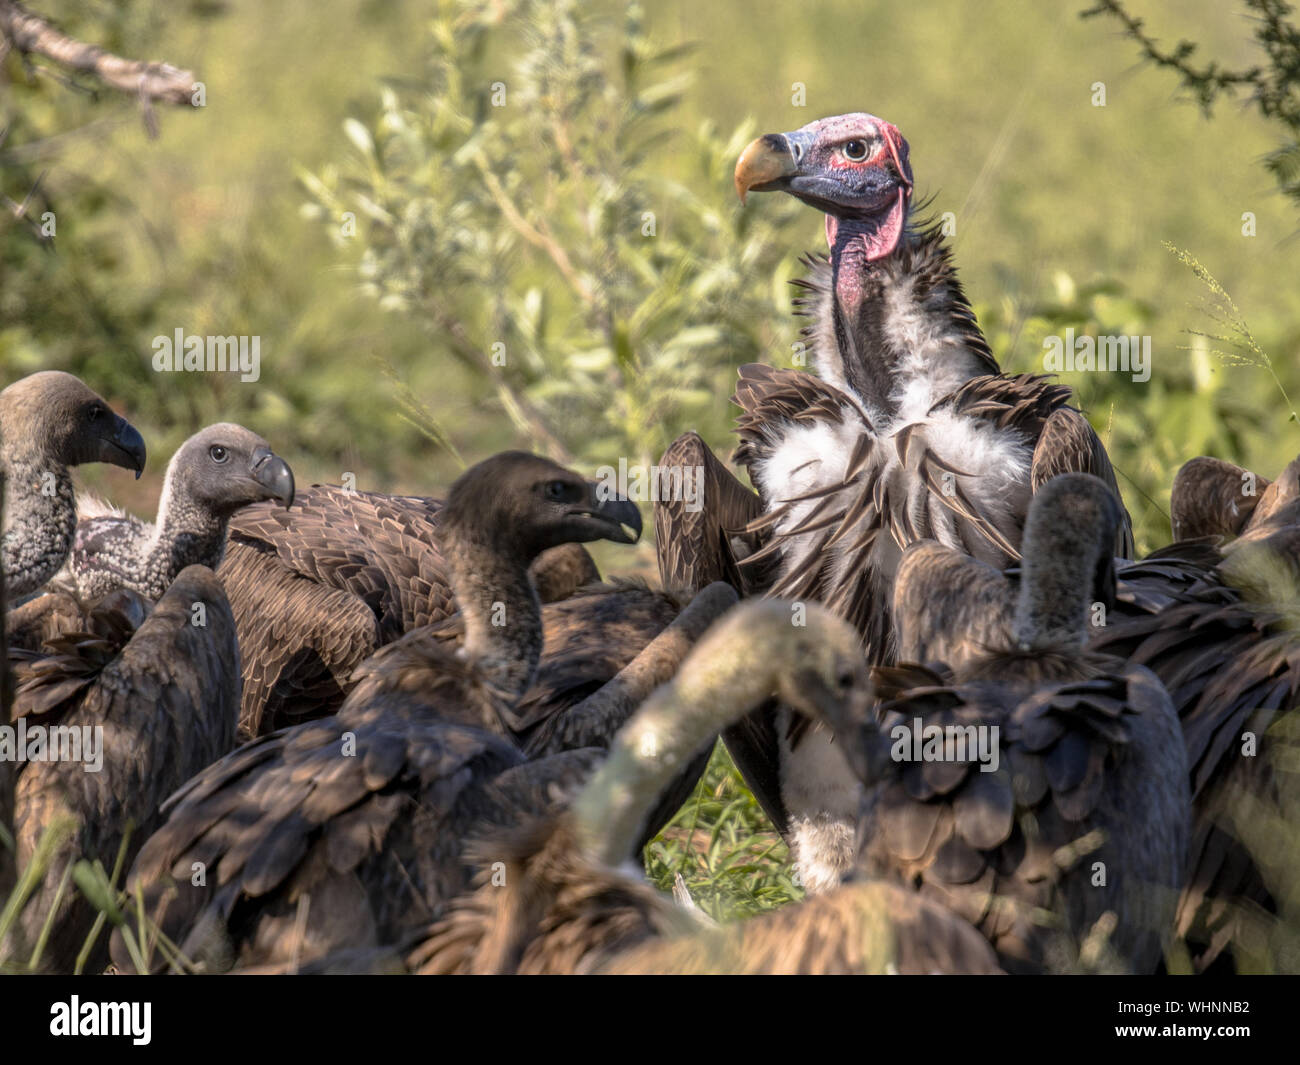 Lappet-faced vulture (Torgos tracheliotus) with pink head dominating White-backed vultures (Gyps africanus) at cadaver in Kruger national park South A Stock Photo